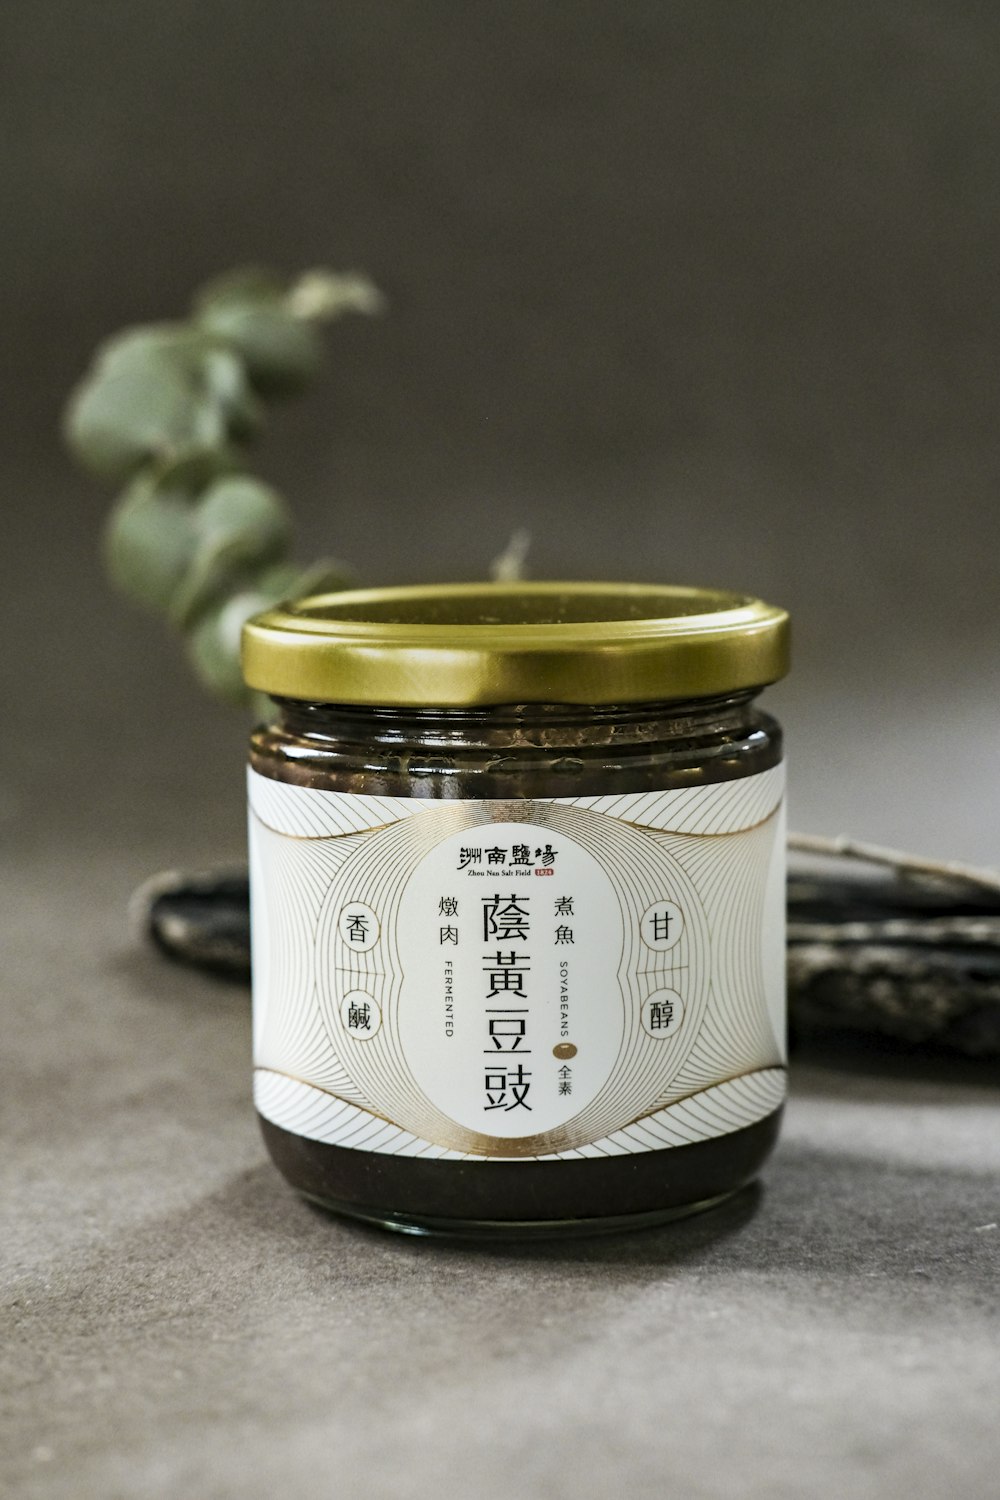 white and black labeled jar